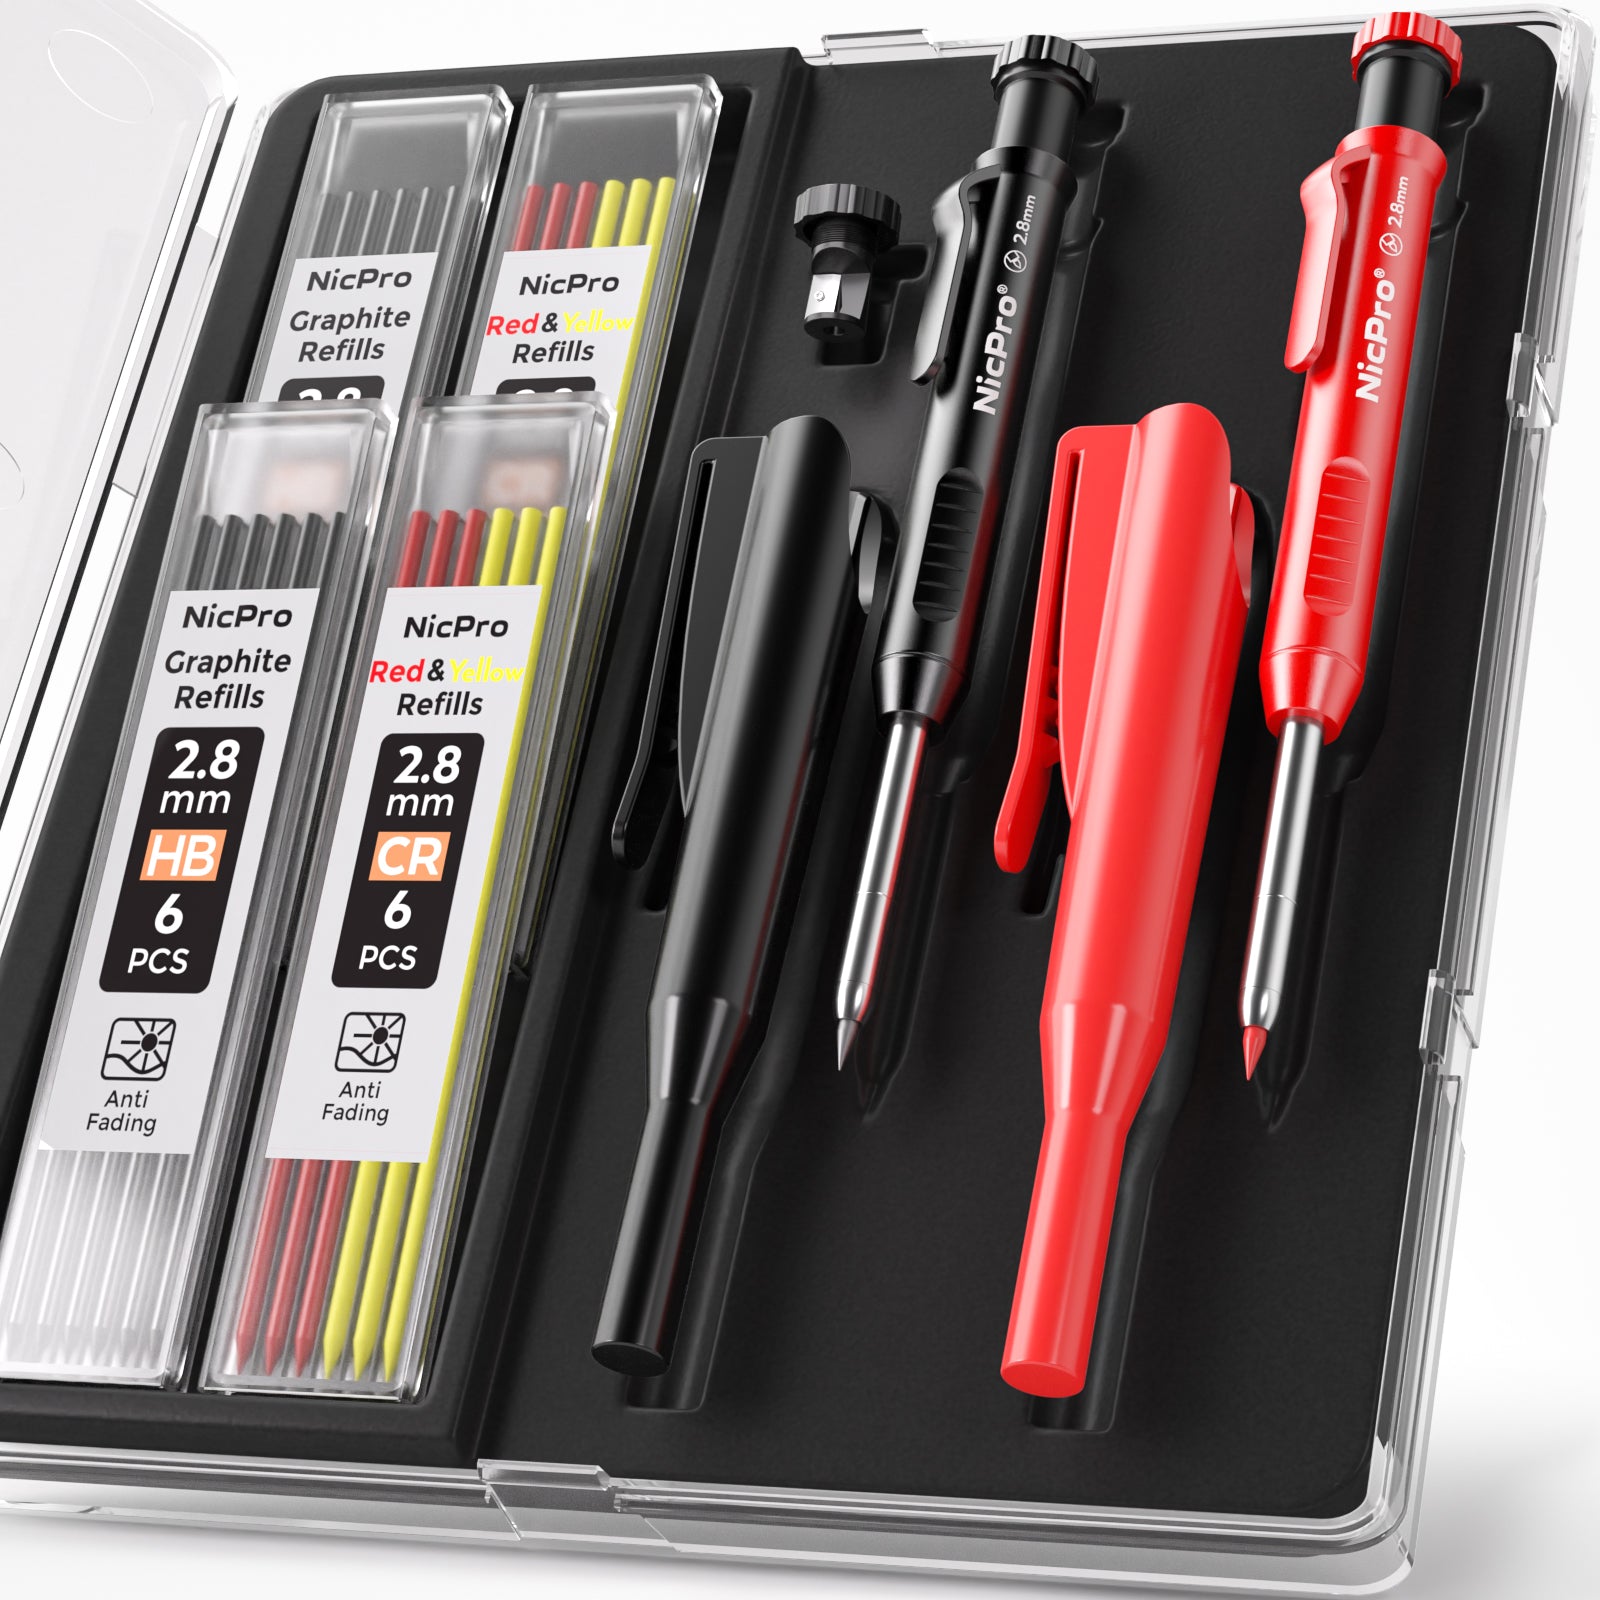 Nicpro 2Pack Carpenter Pencil with Sharpener, Mechanical Carpenter Pencils with 26 Refills (Red, Black, Yellow), Deep Hole Marker Construction Heavy Duty Woodworking Pencils for Father's Day Gift